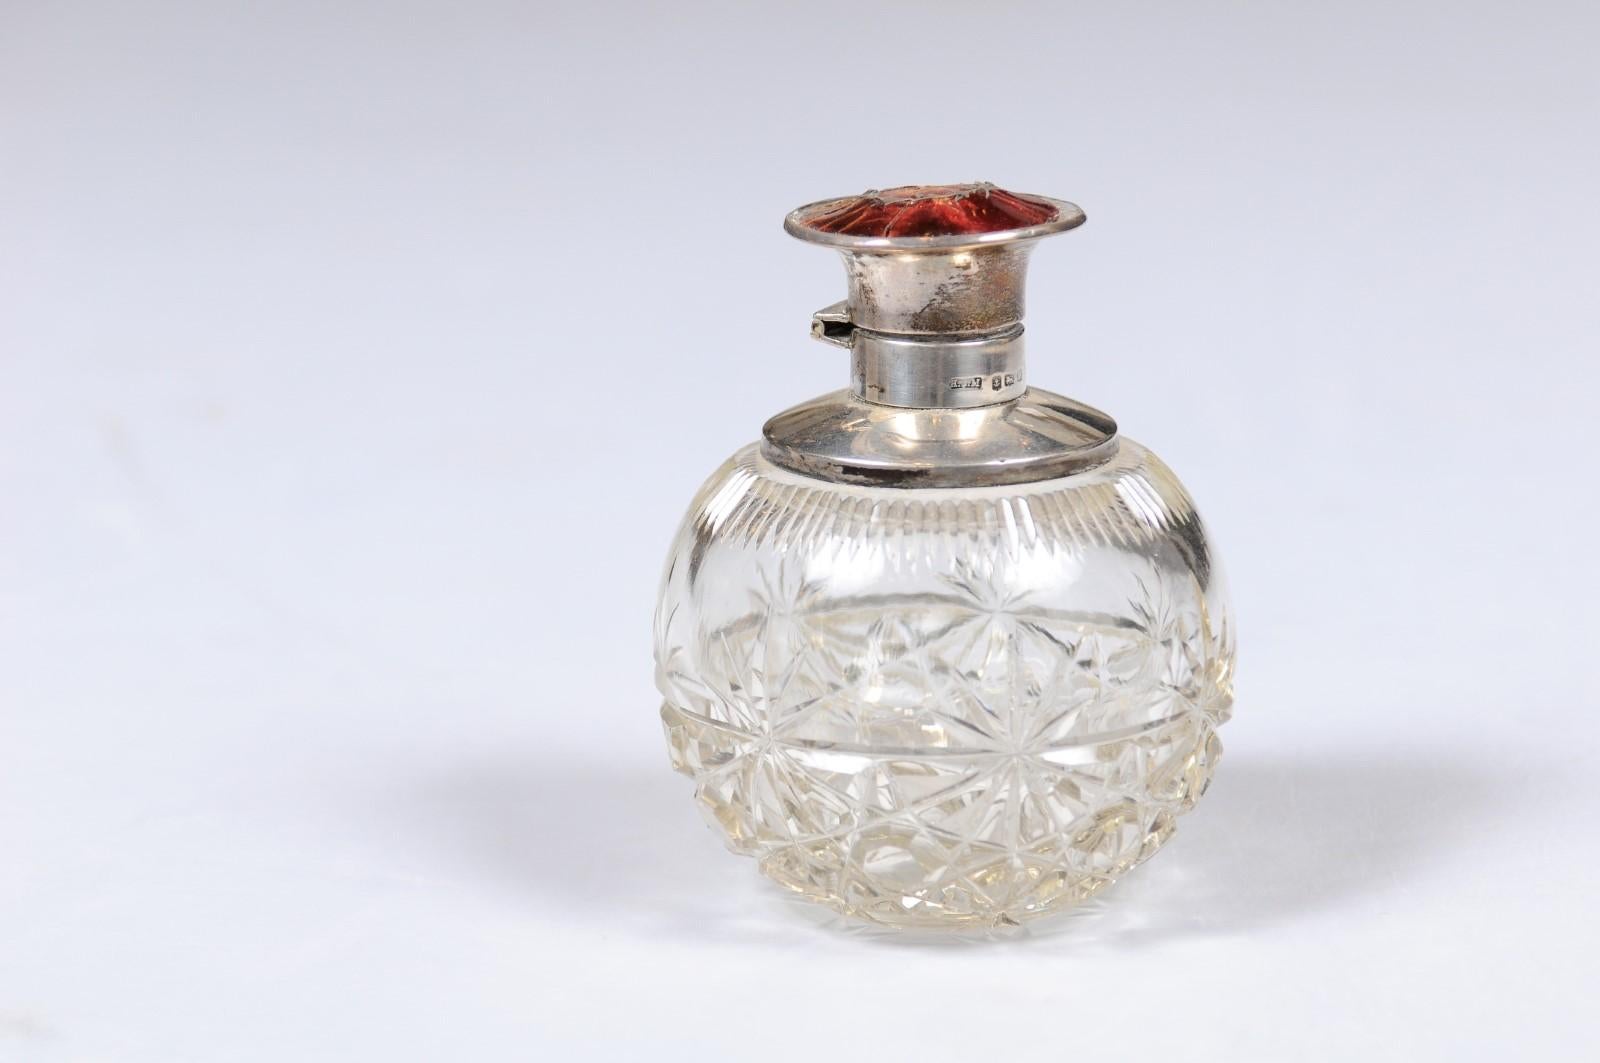 An English crystal toiletry bottle from the 19th century with silver lid and star motifs. Born in England during the reign of Queen Victoria, this elegant crystal toiletry bottle features a circular body, adorned with a delicate star-shaped décor.